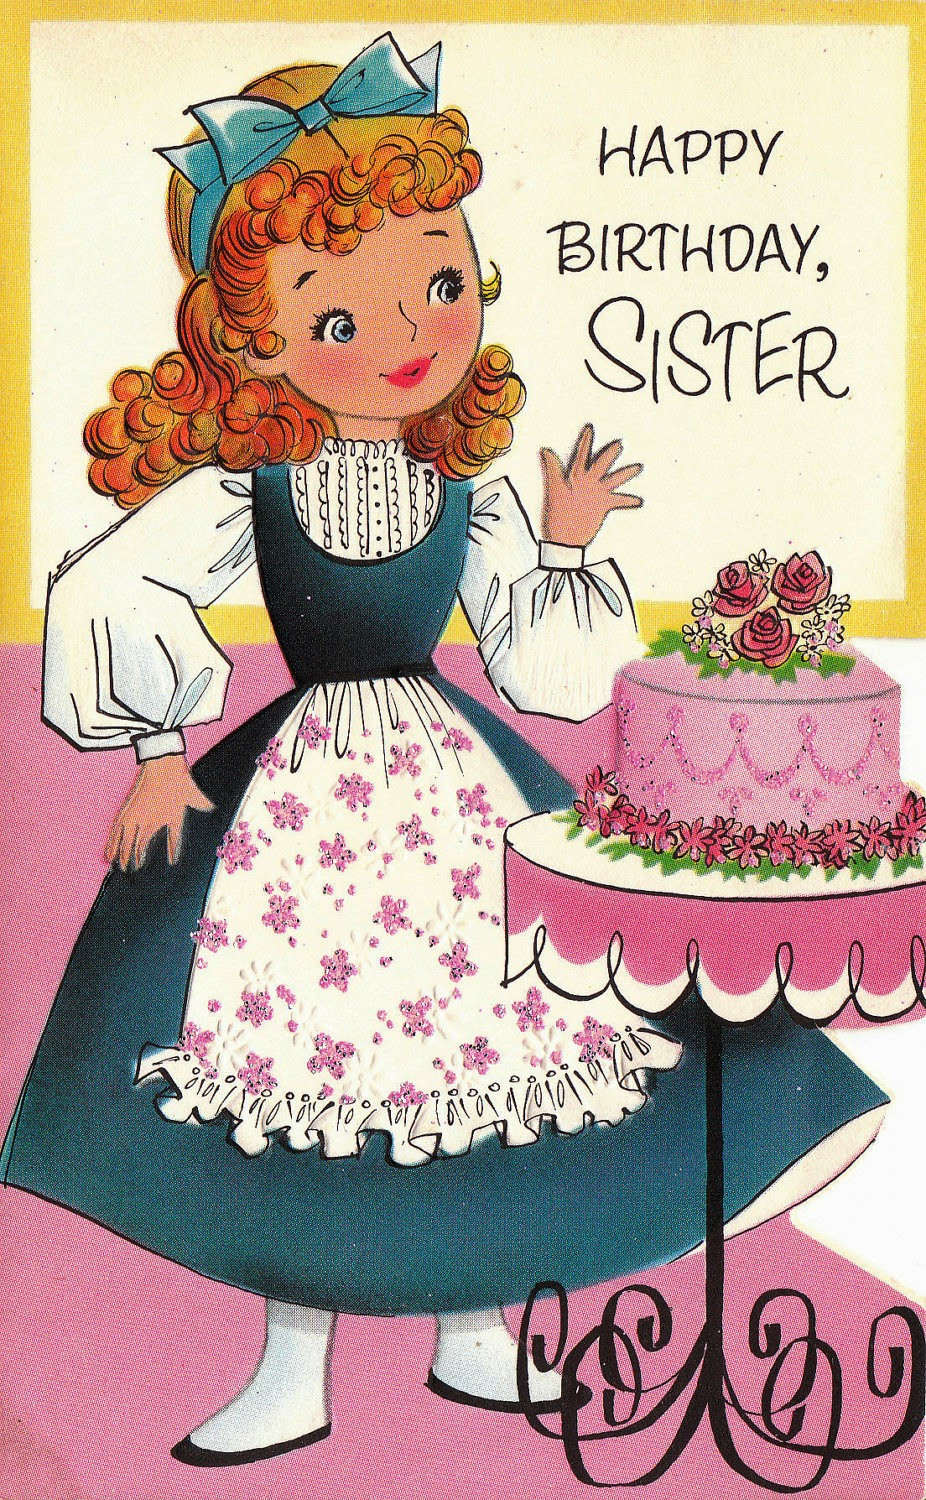 Happy Birthday Sister Cards
 Happy birthday wishes cards images for sister Greetings